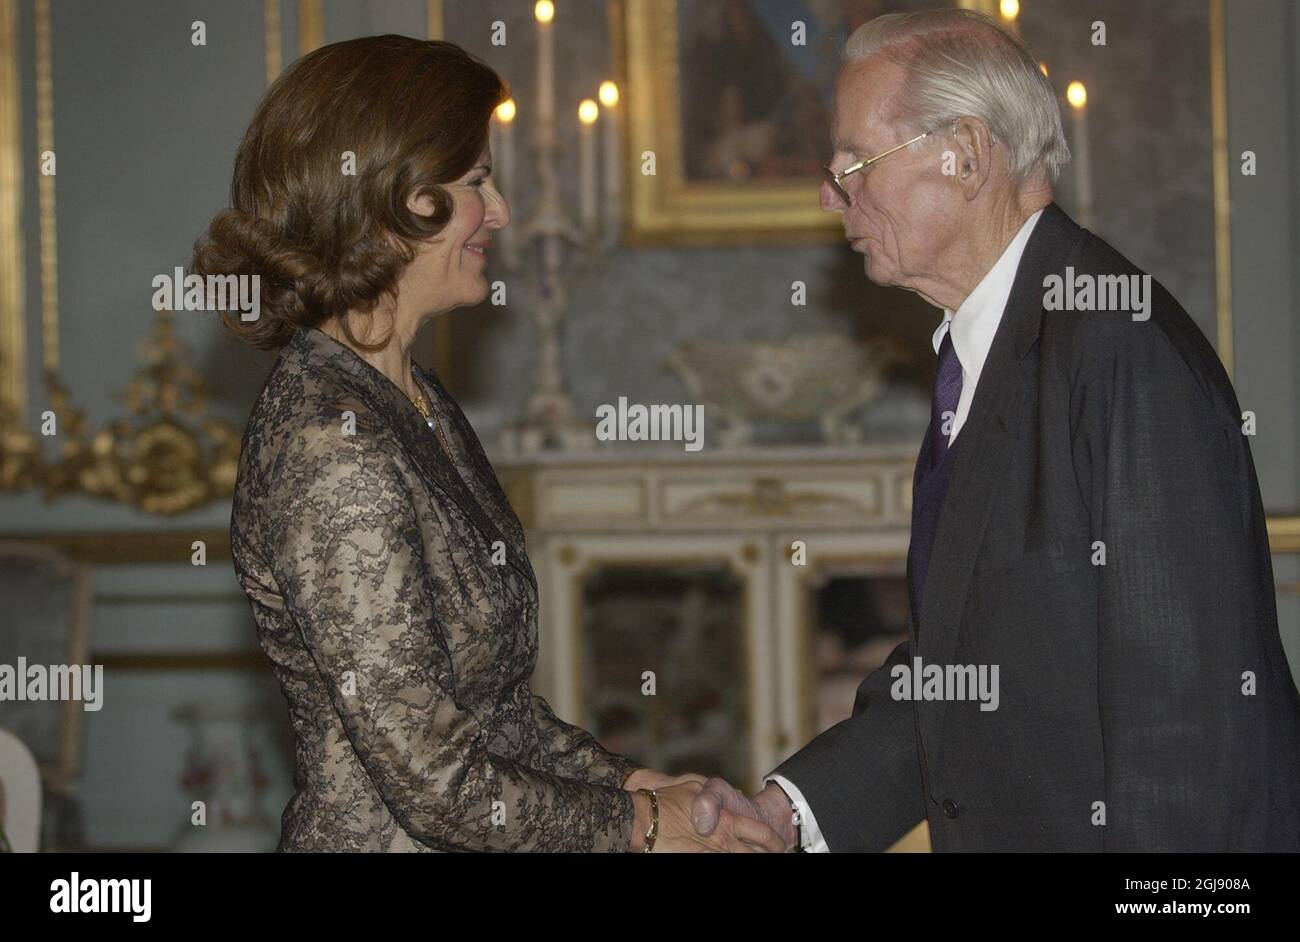 STOCKHOLM 20031222 Swedish major industrialist family , the Wallenbergs, was represented by Peter Wallenberg at Queen Silvia of Swedens birthday reception at the Royal Palace in Stockholm, Sweden, December 22, 2003. Queen SilviaÂ«s 60th birthday celebrations starts Monday thought the official birthday is December 23. Foto Fredrik Sandberg / SCANPIX POOL Code 71420  Stock Photo